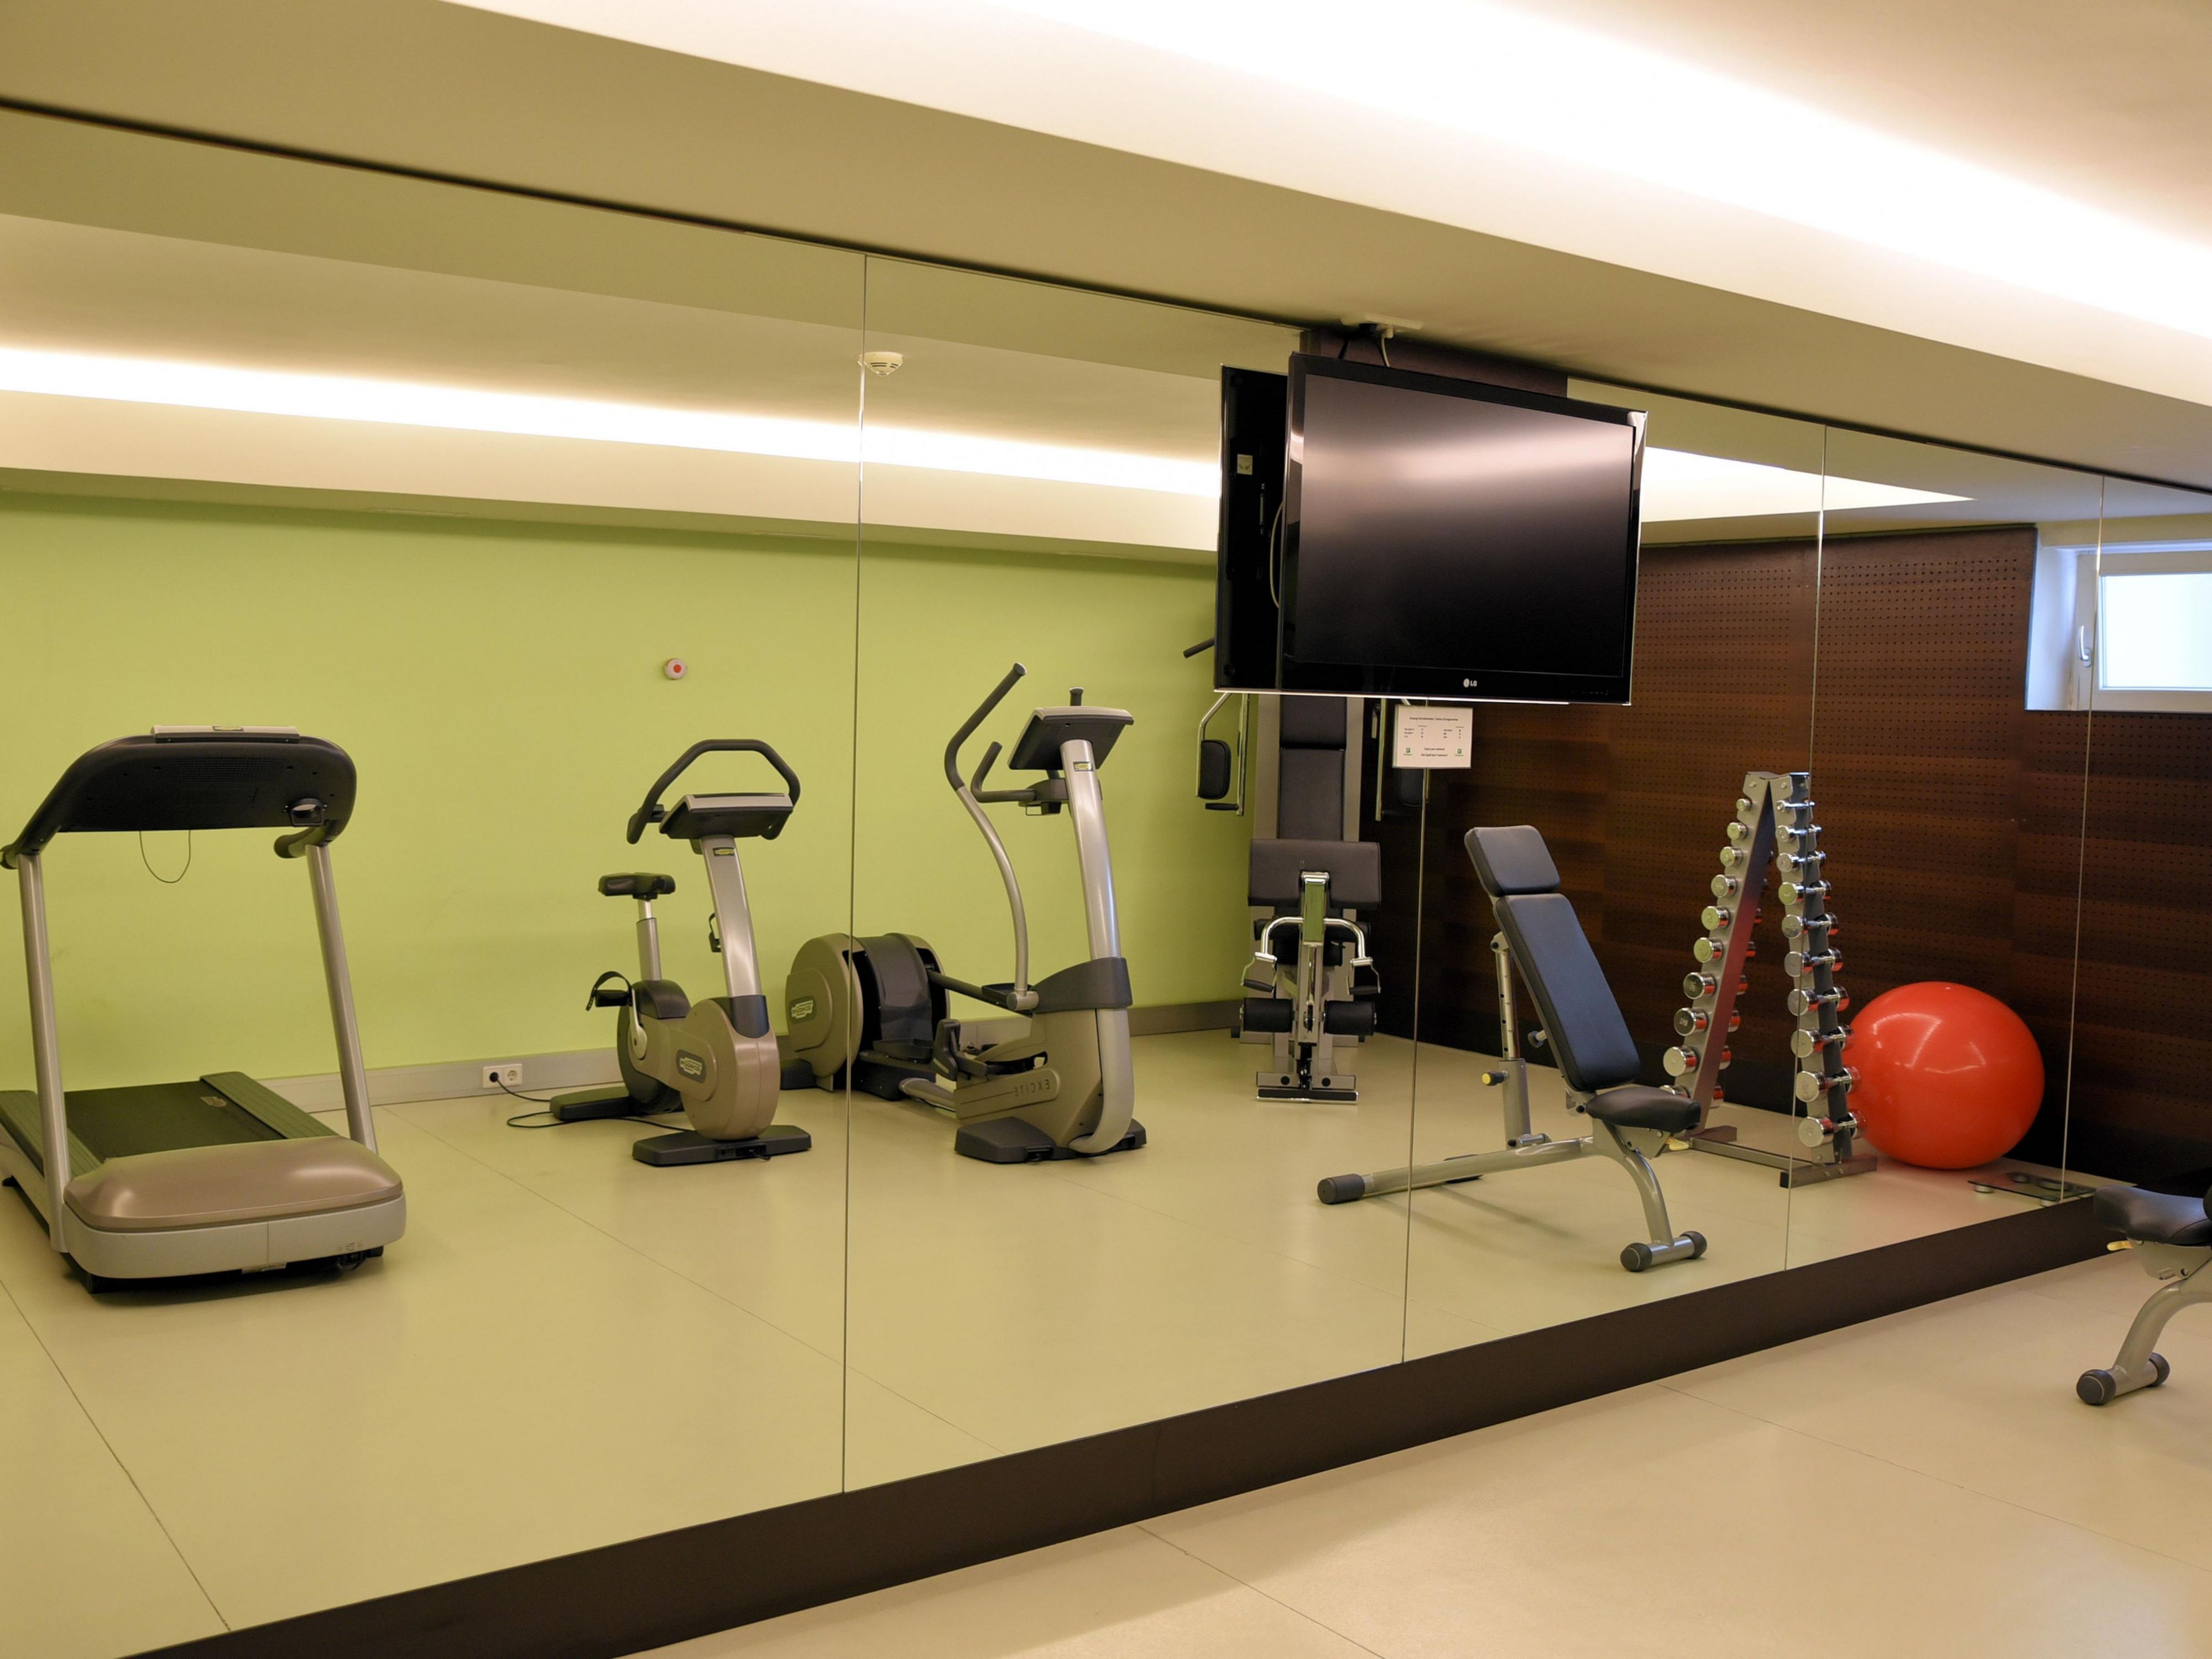 Enjoy the day with sport and energise your cardiovascular circulation. The mini gym offers you modern cardio equipment e.g. treatmill, elliptical machine, weights and a bis mirror with TV. This area is accessible and exclusive free for our guests.